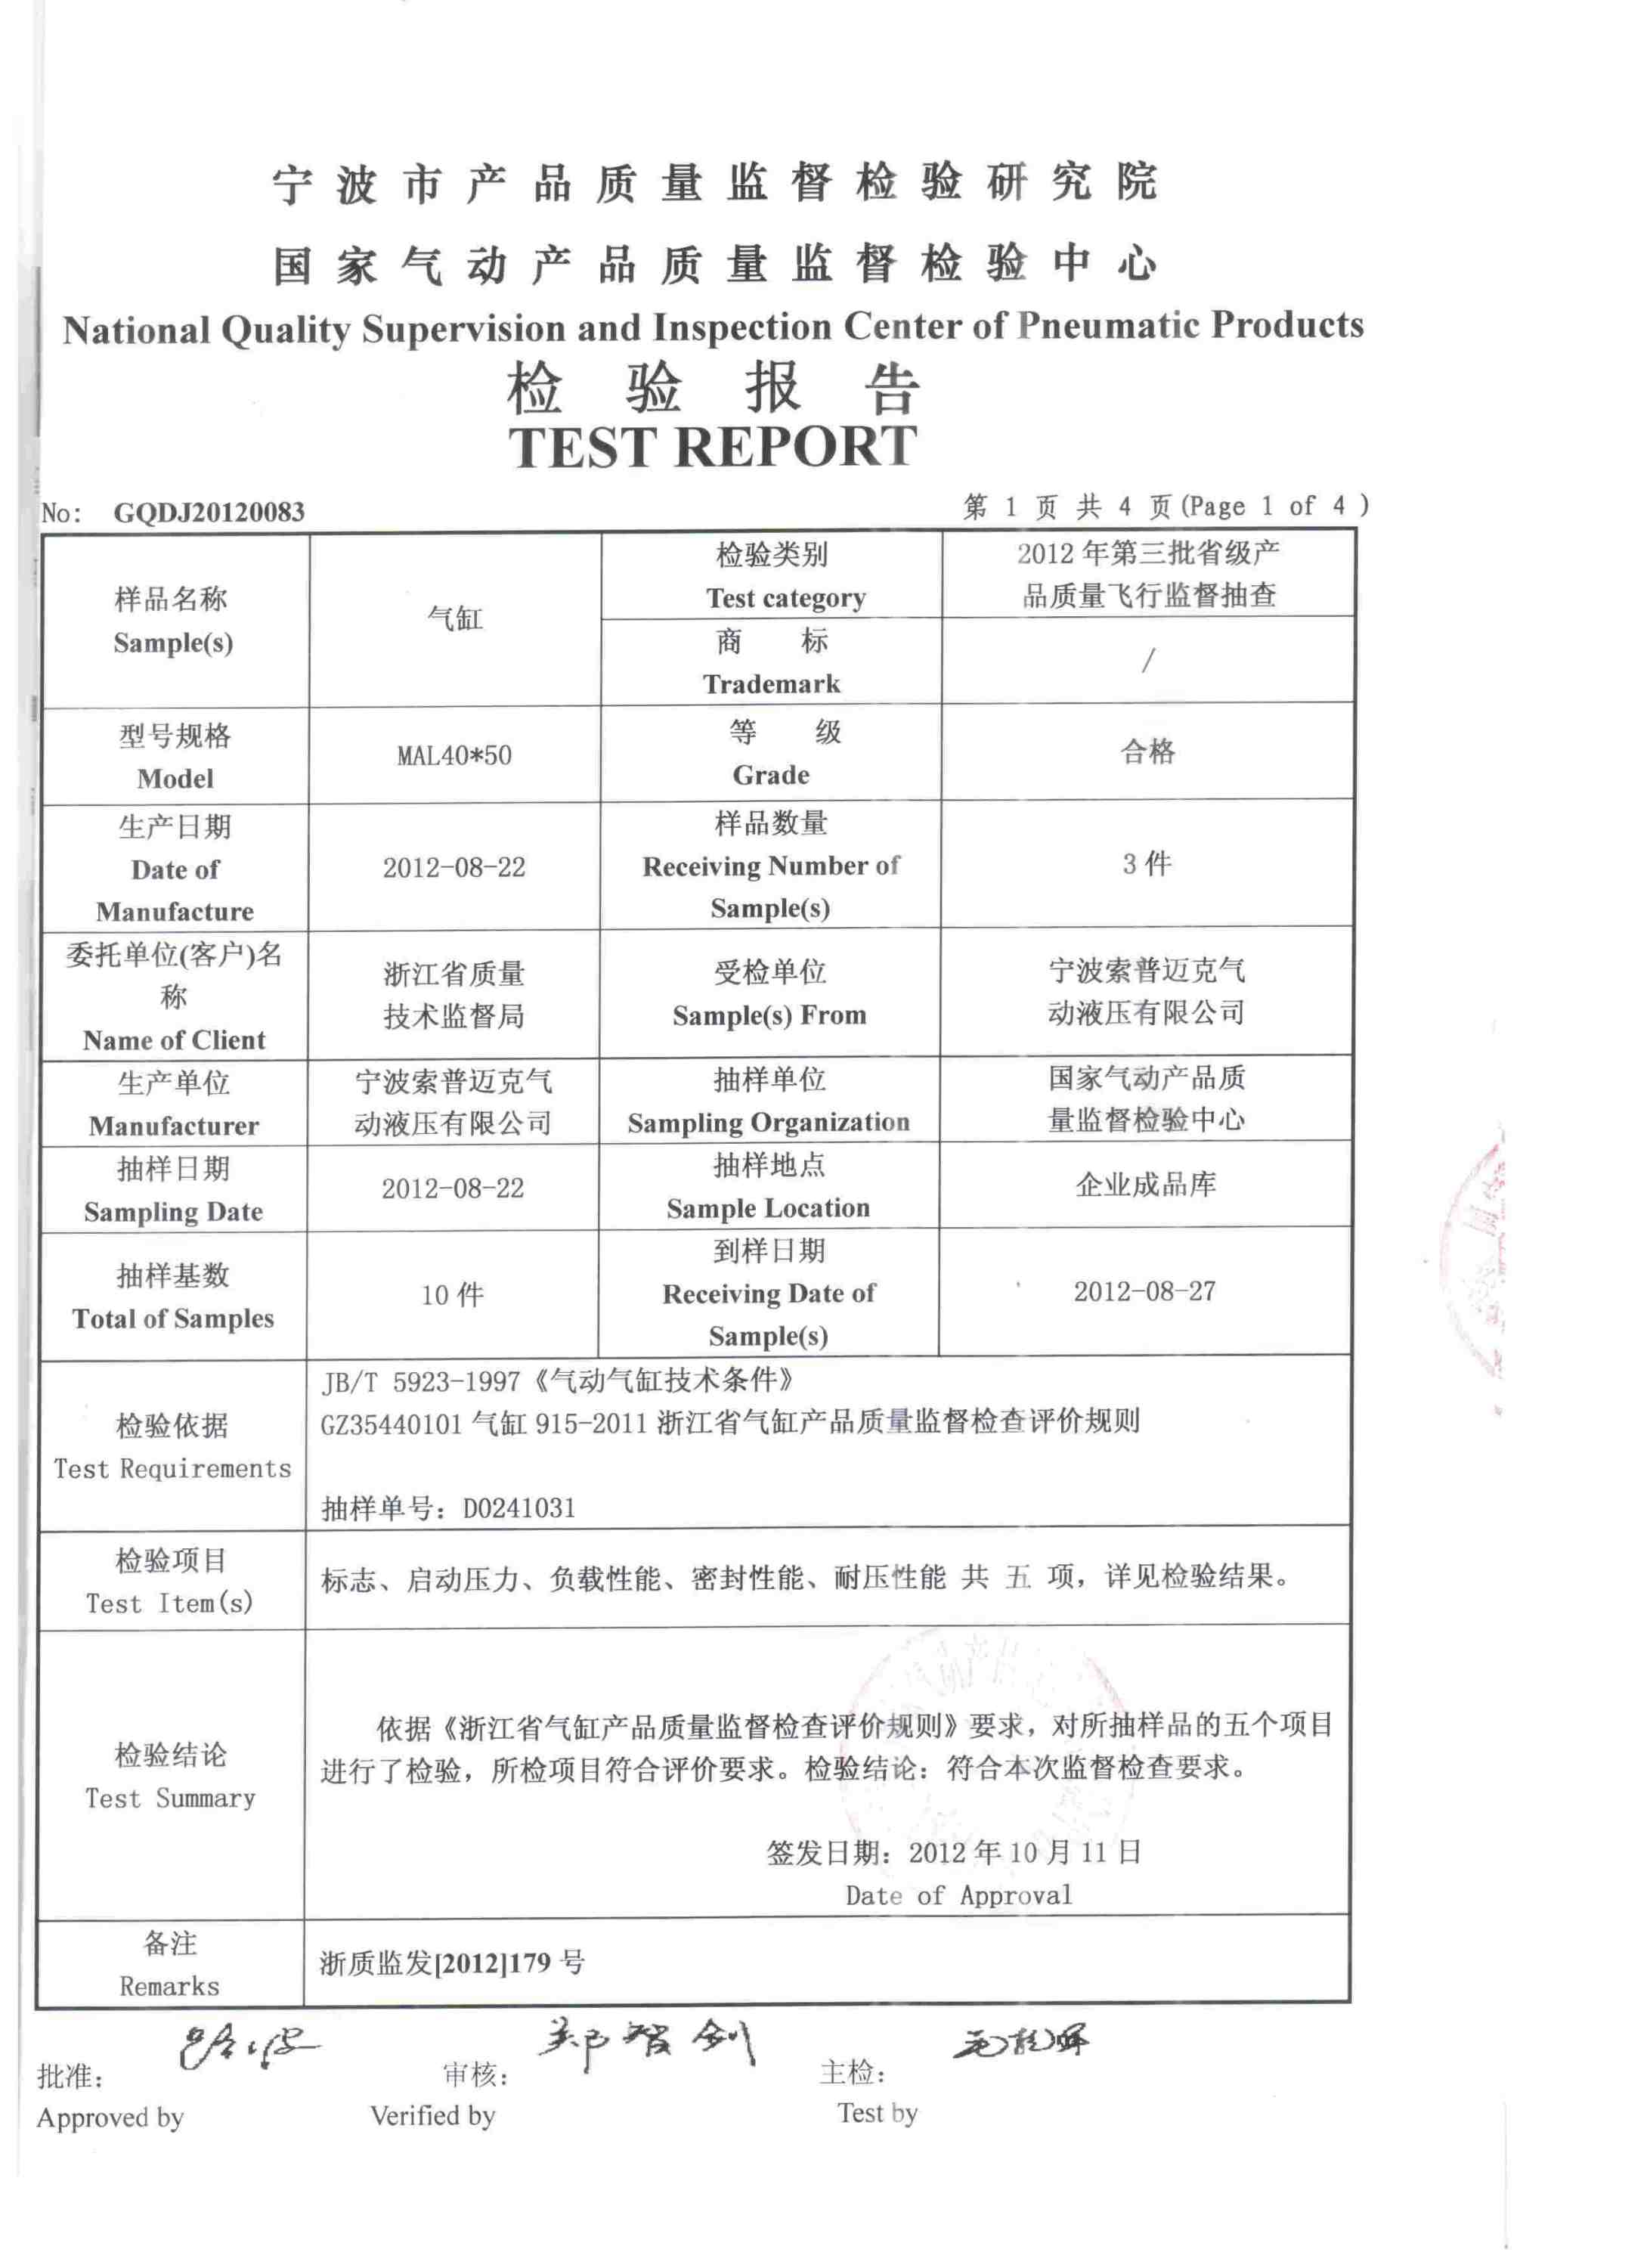 Products Test Report 2012